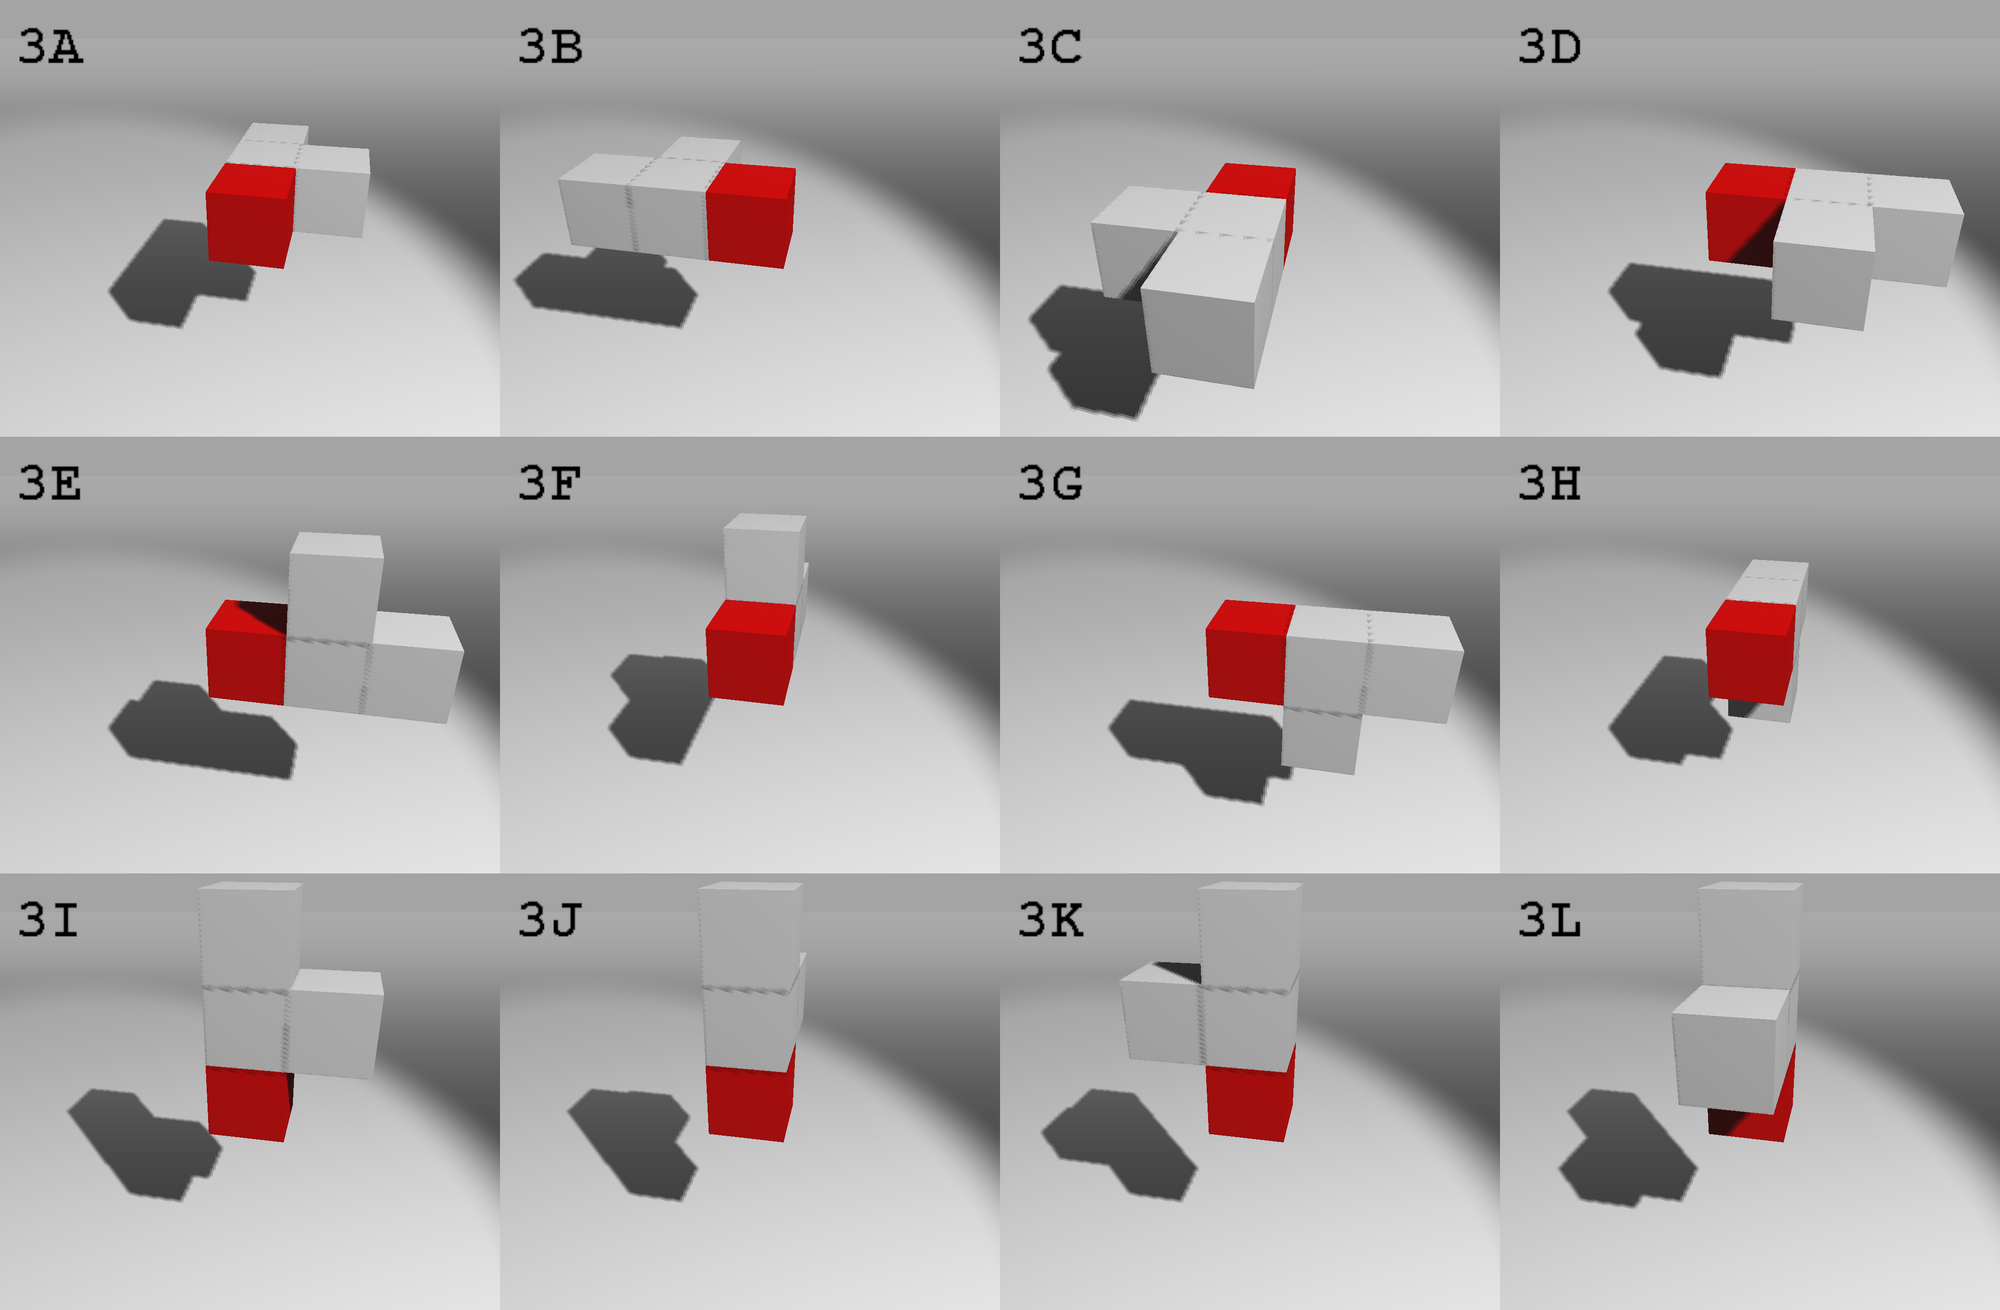 Solving the Soma cube in 3D